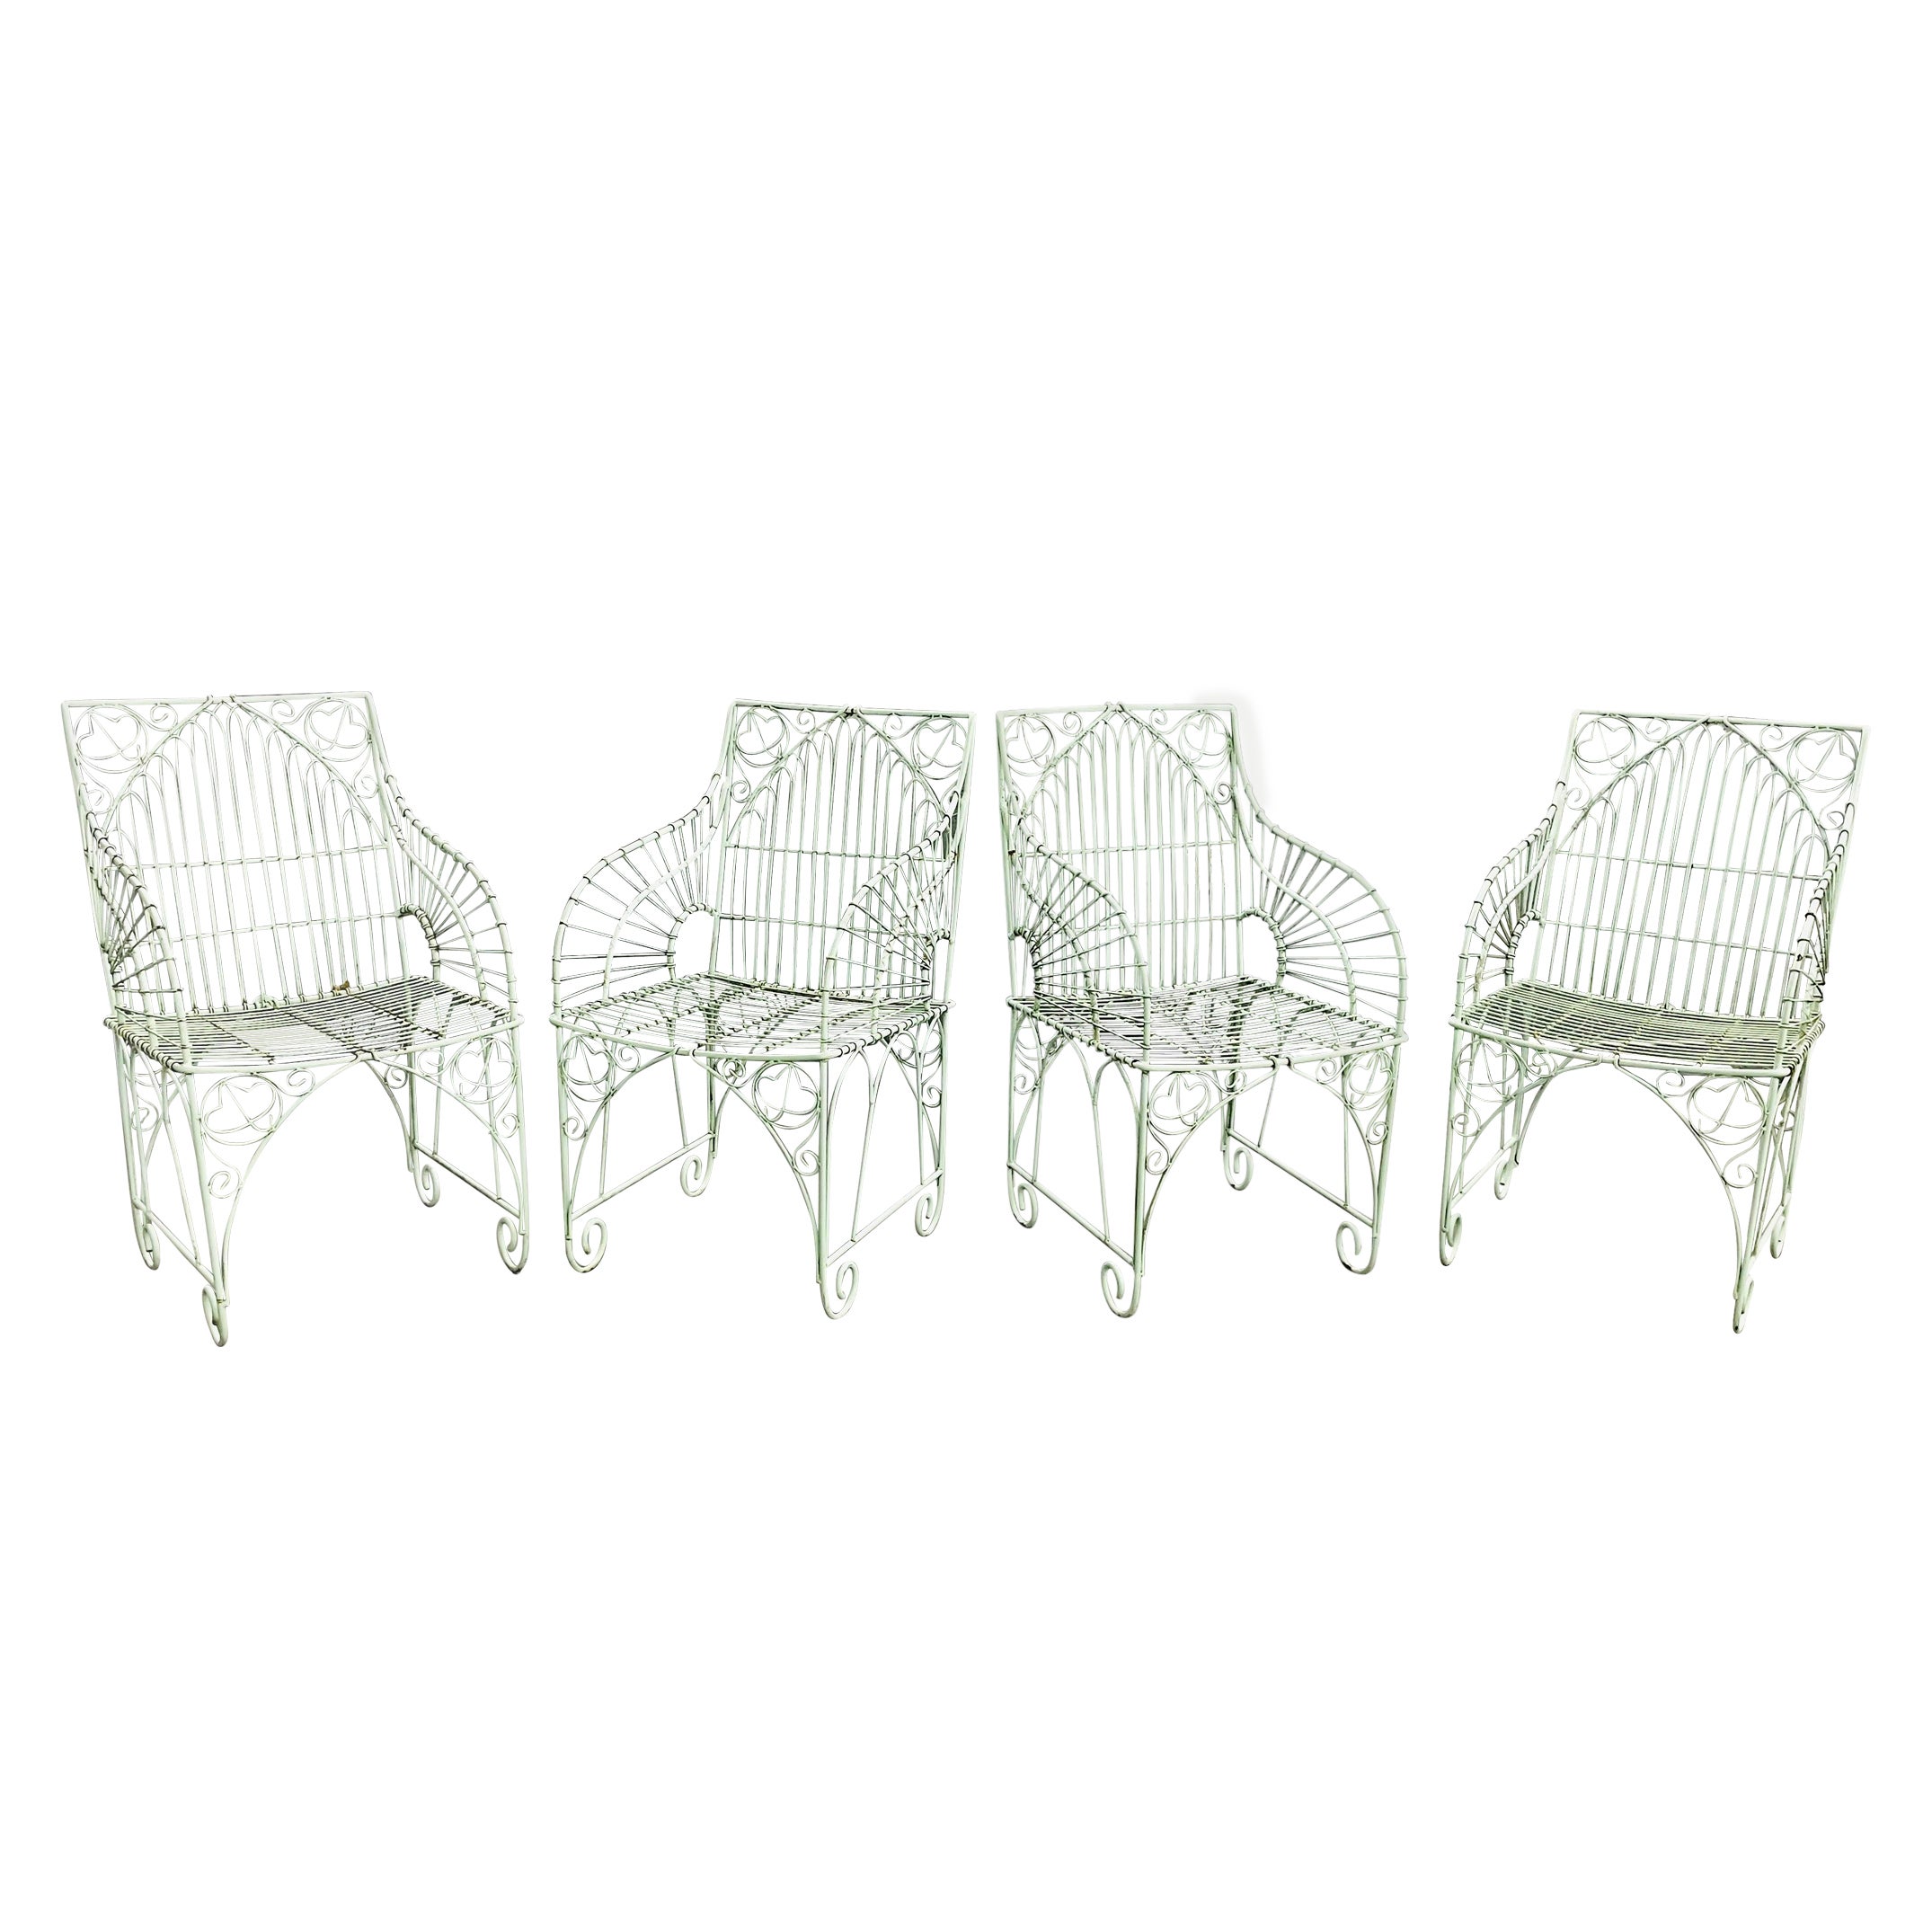 Vintage Wrought Iron Outdoor Chairs For Sale